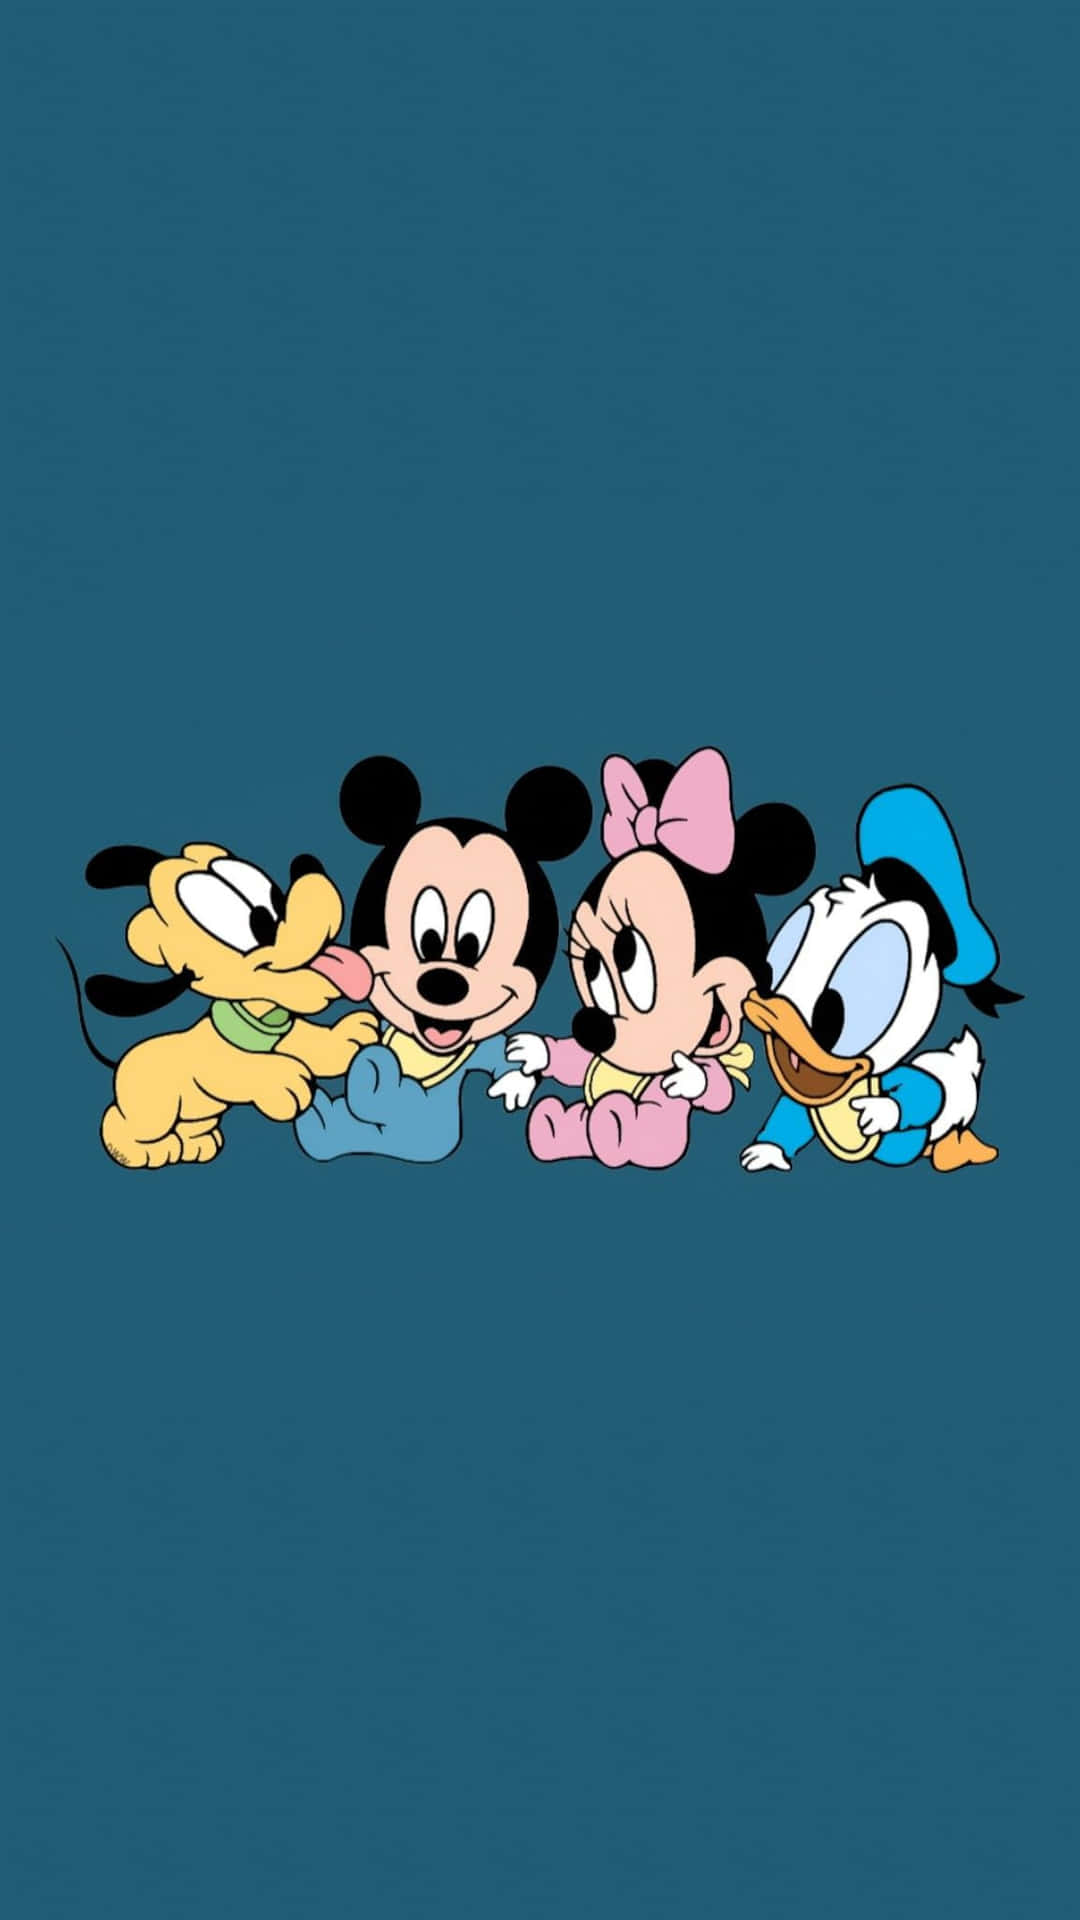 A group of adorable cartoon characters smiling and posing together Wallpaper